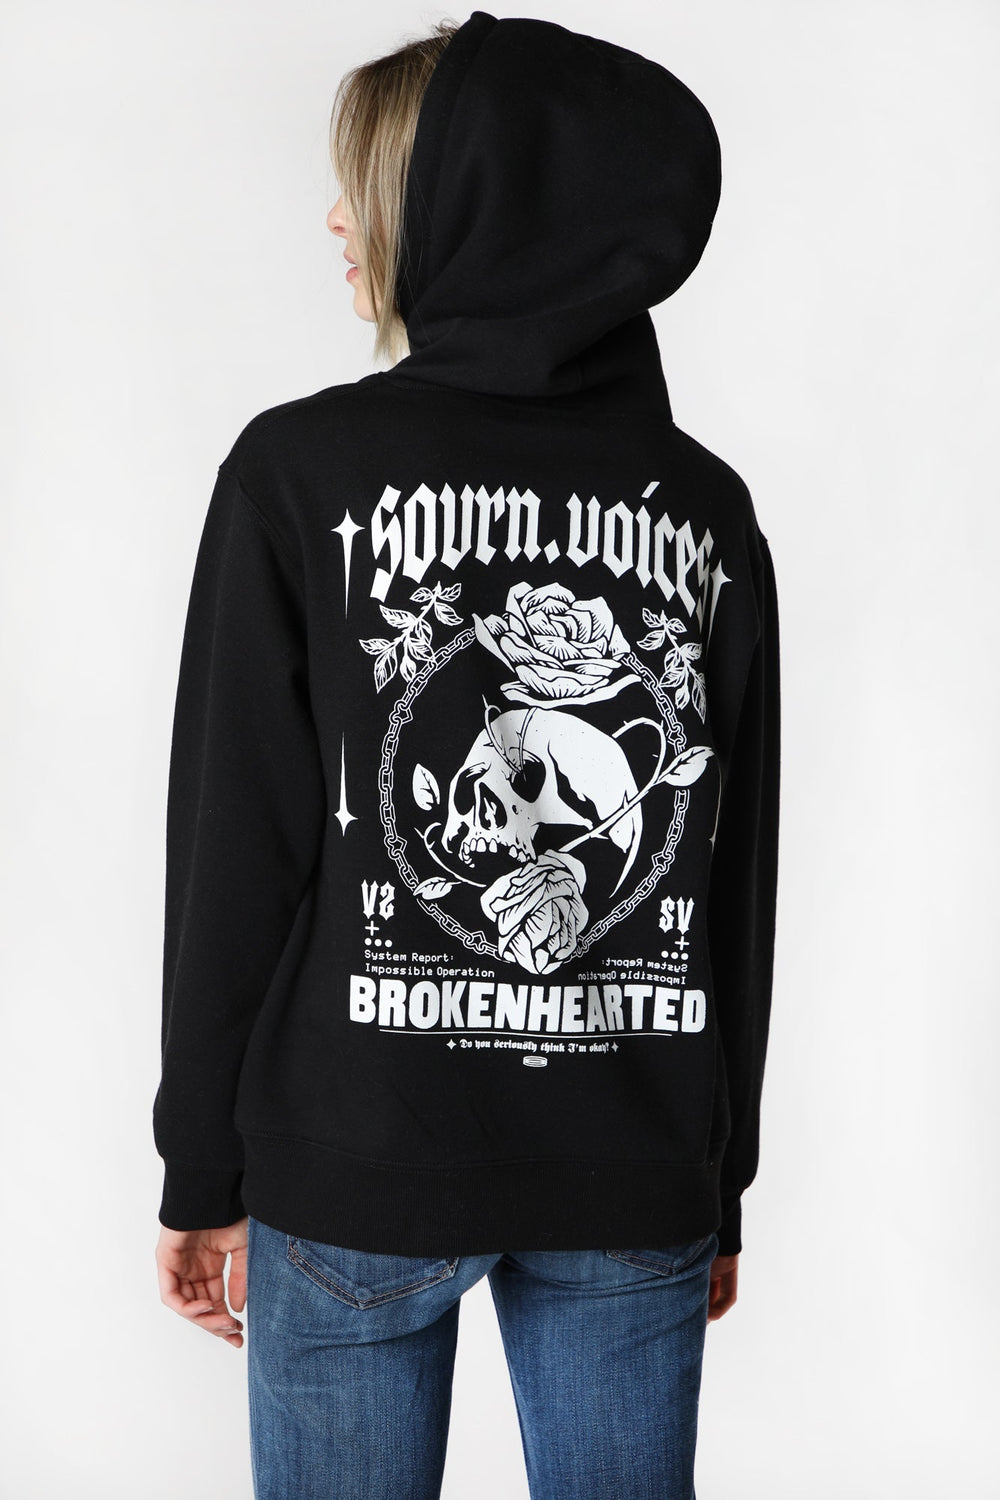 Womens Sovrn Voices Brokehearted Graphic Hoodie Womens Sovrn Voices Brokehearted Graphic Hoodie